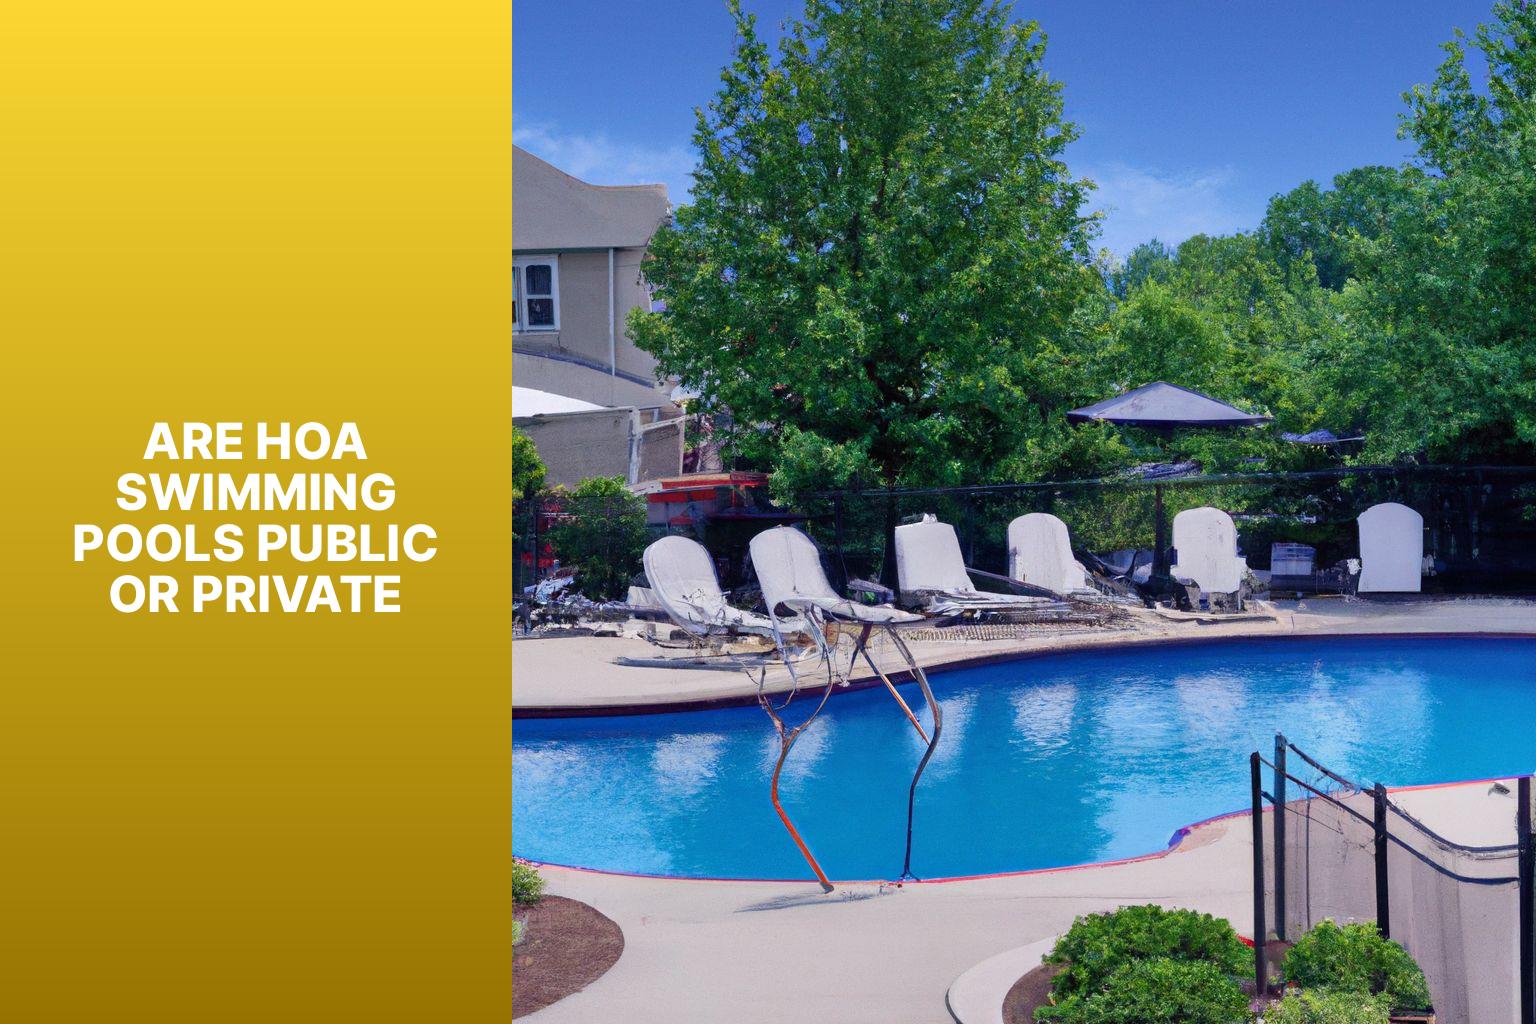 are hoa swimming pools public or private0uh6 Are HOA Swimming Pools Public or Private?